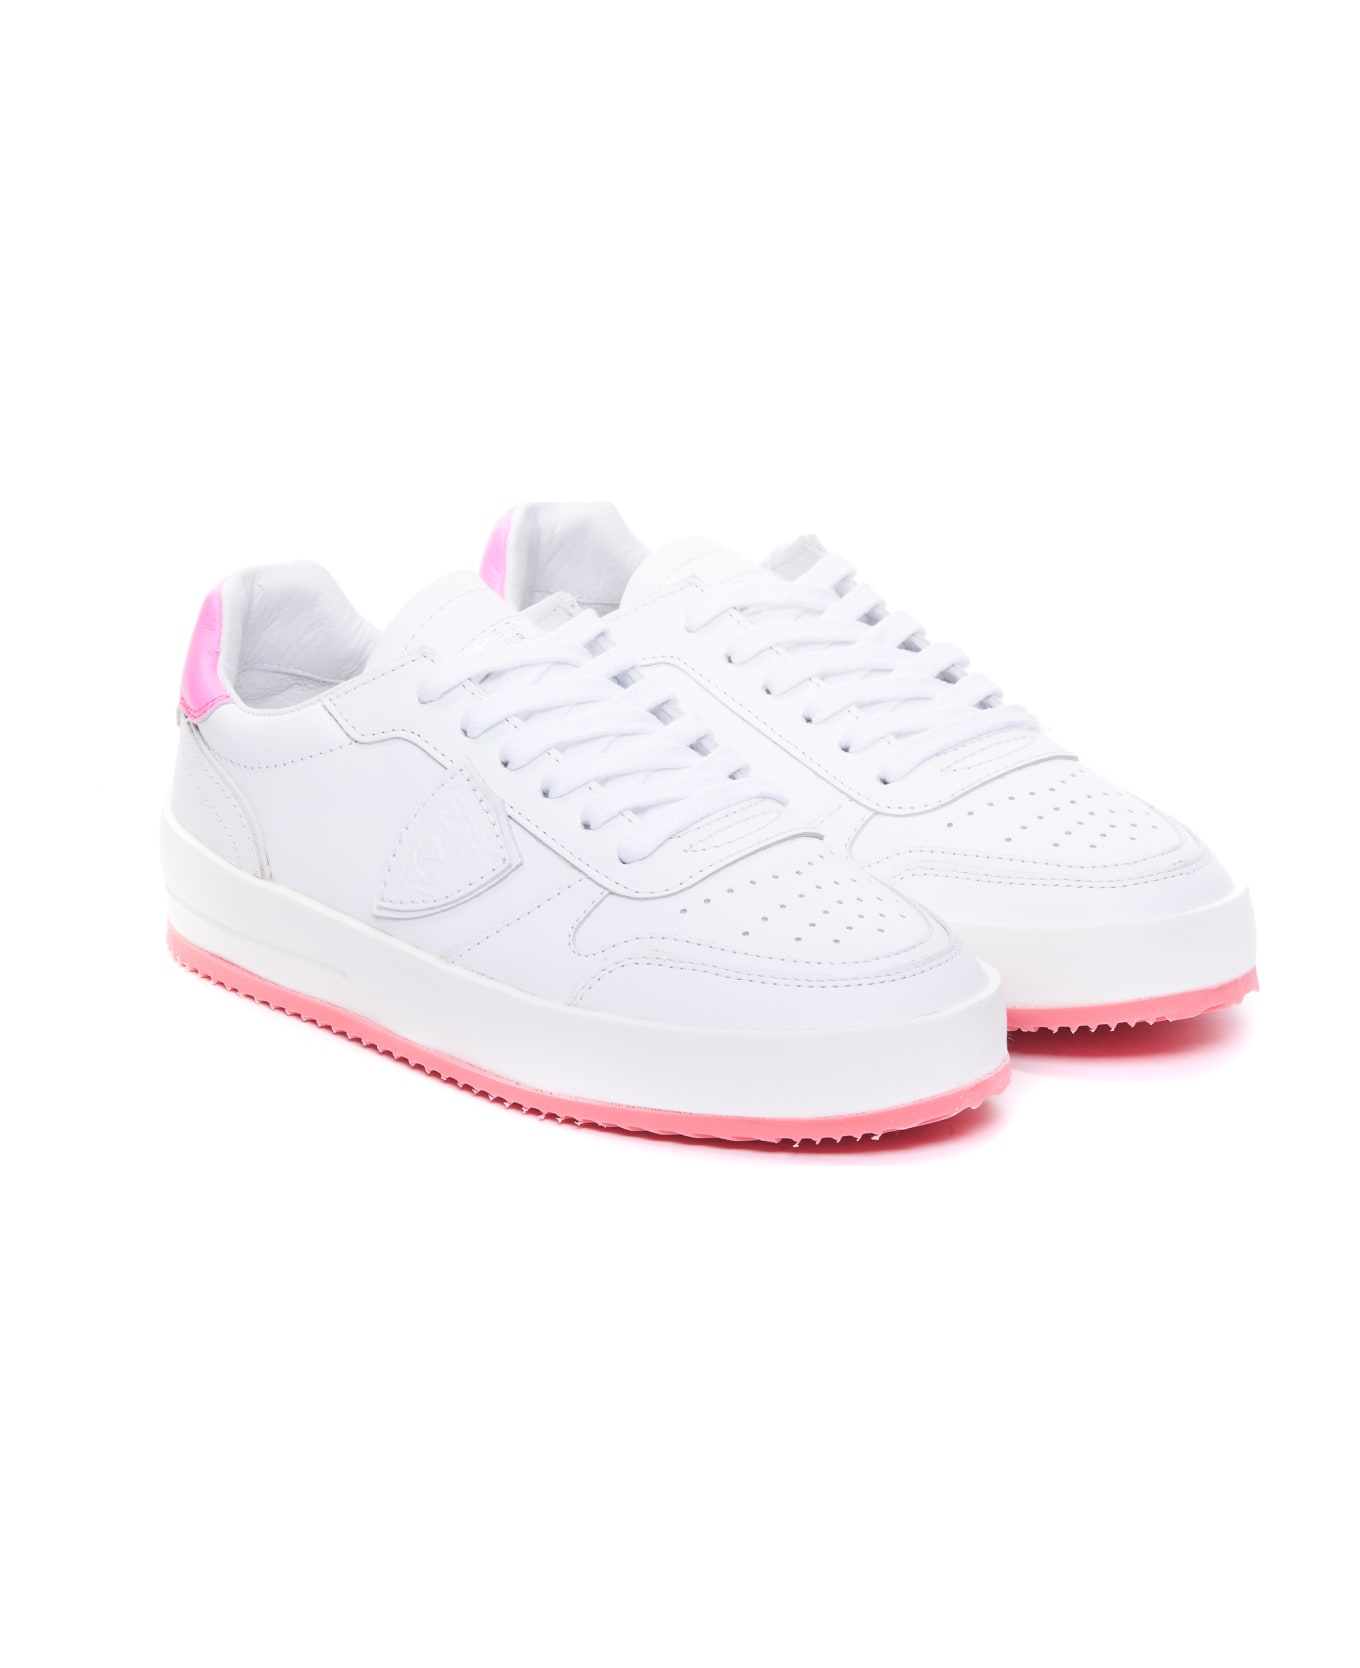 Philippe Model Nice Low Sneakers - Blanc Fucsia